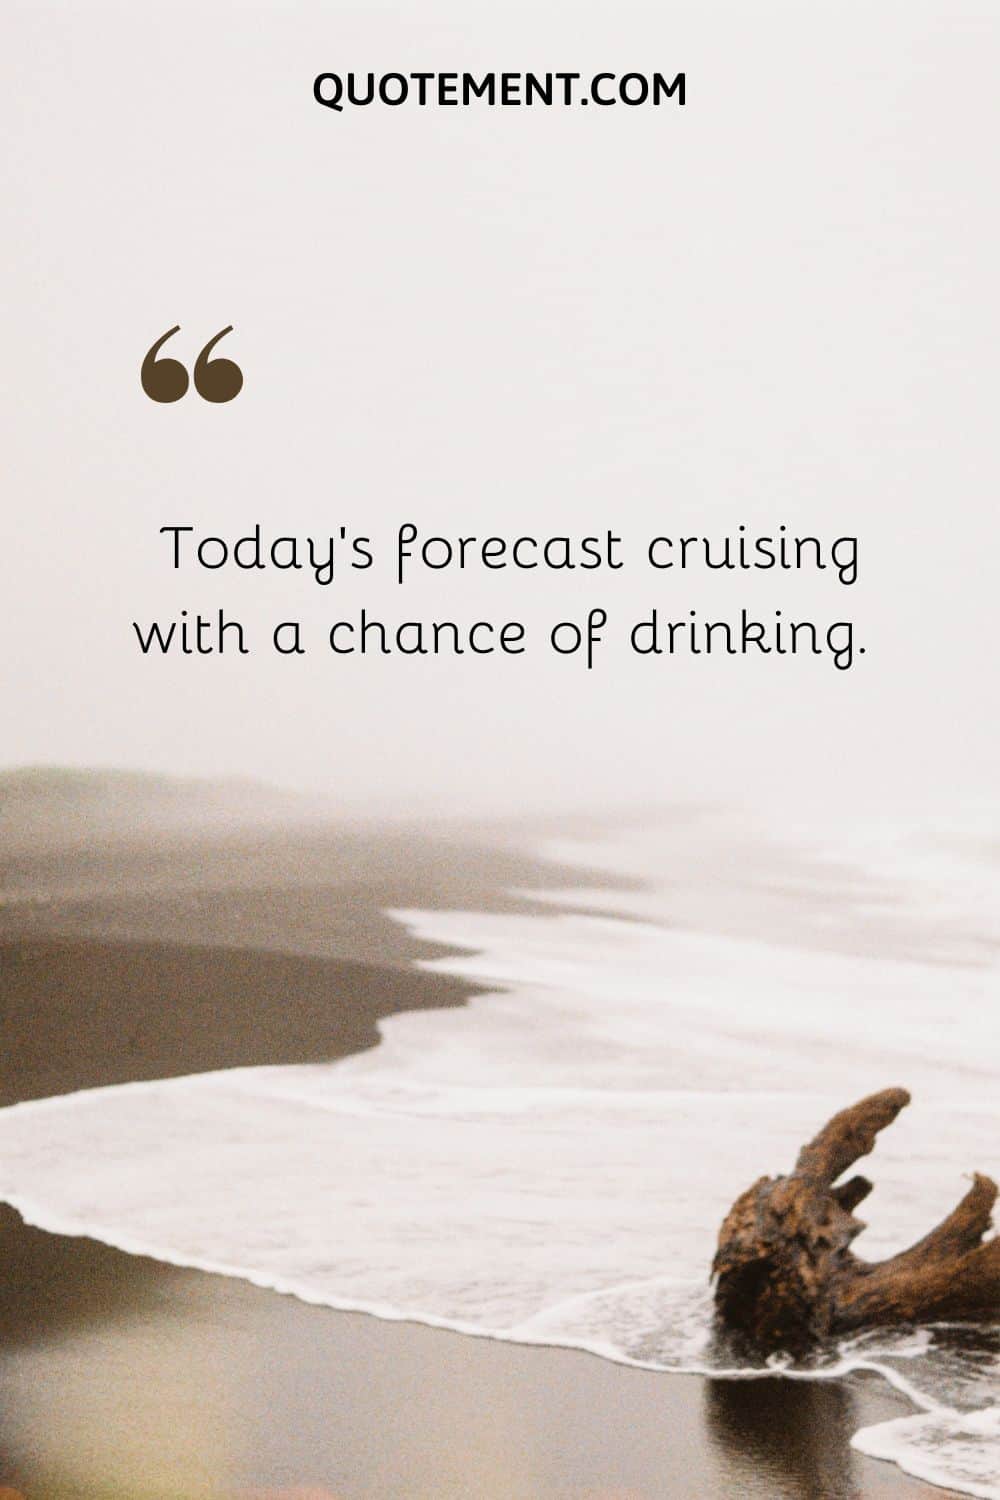 Today’s forecast cruising with a chance of drinking.